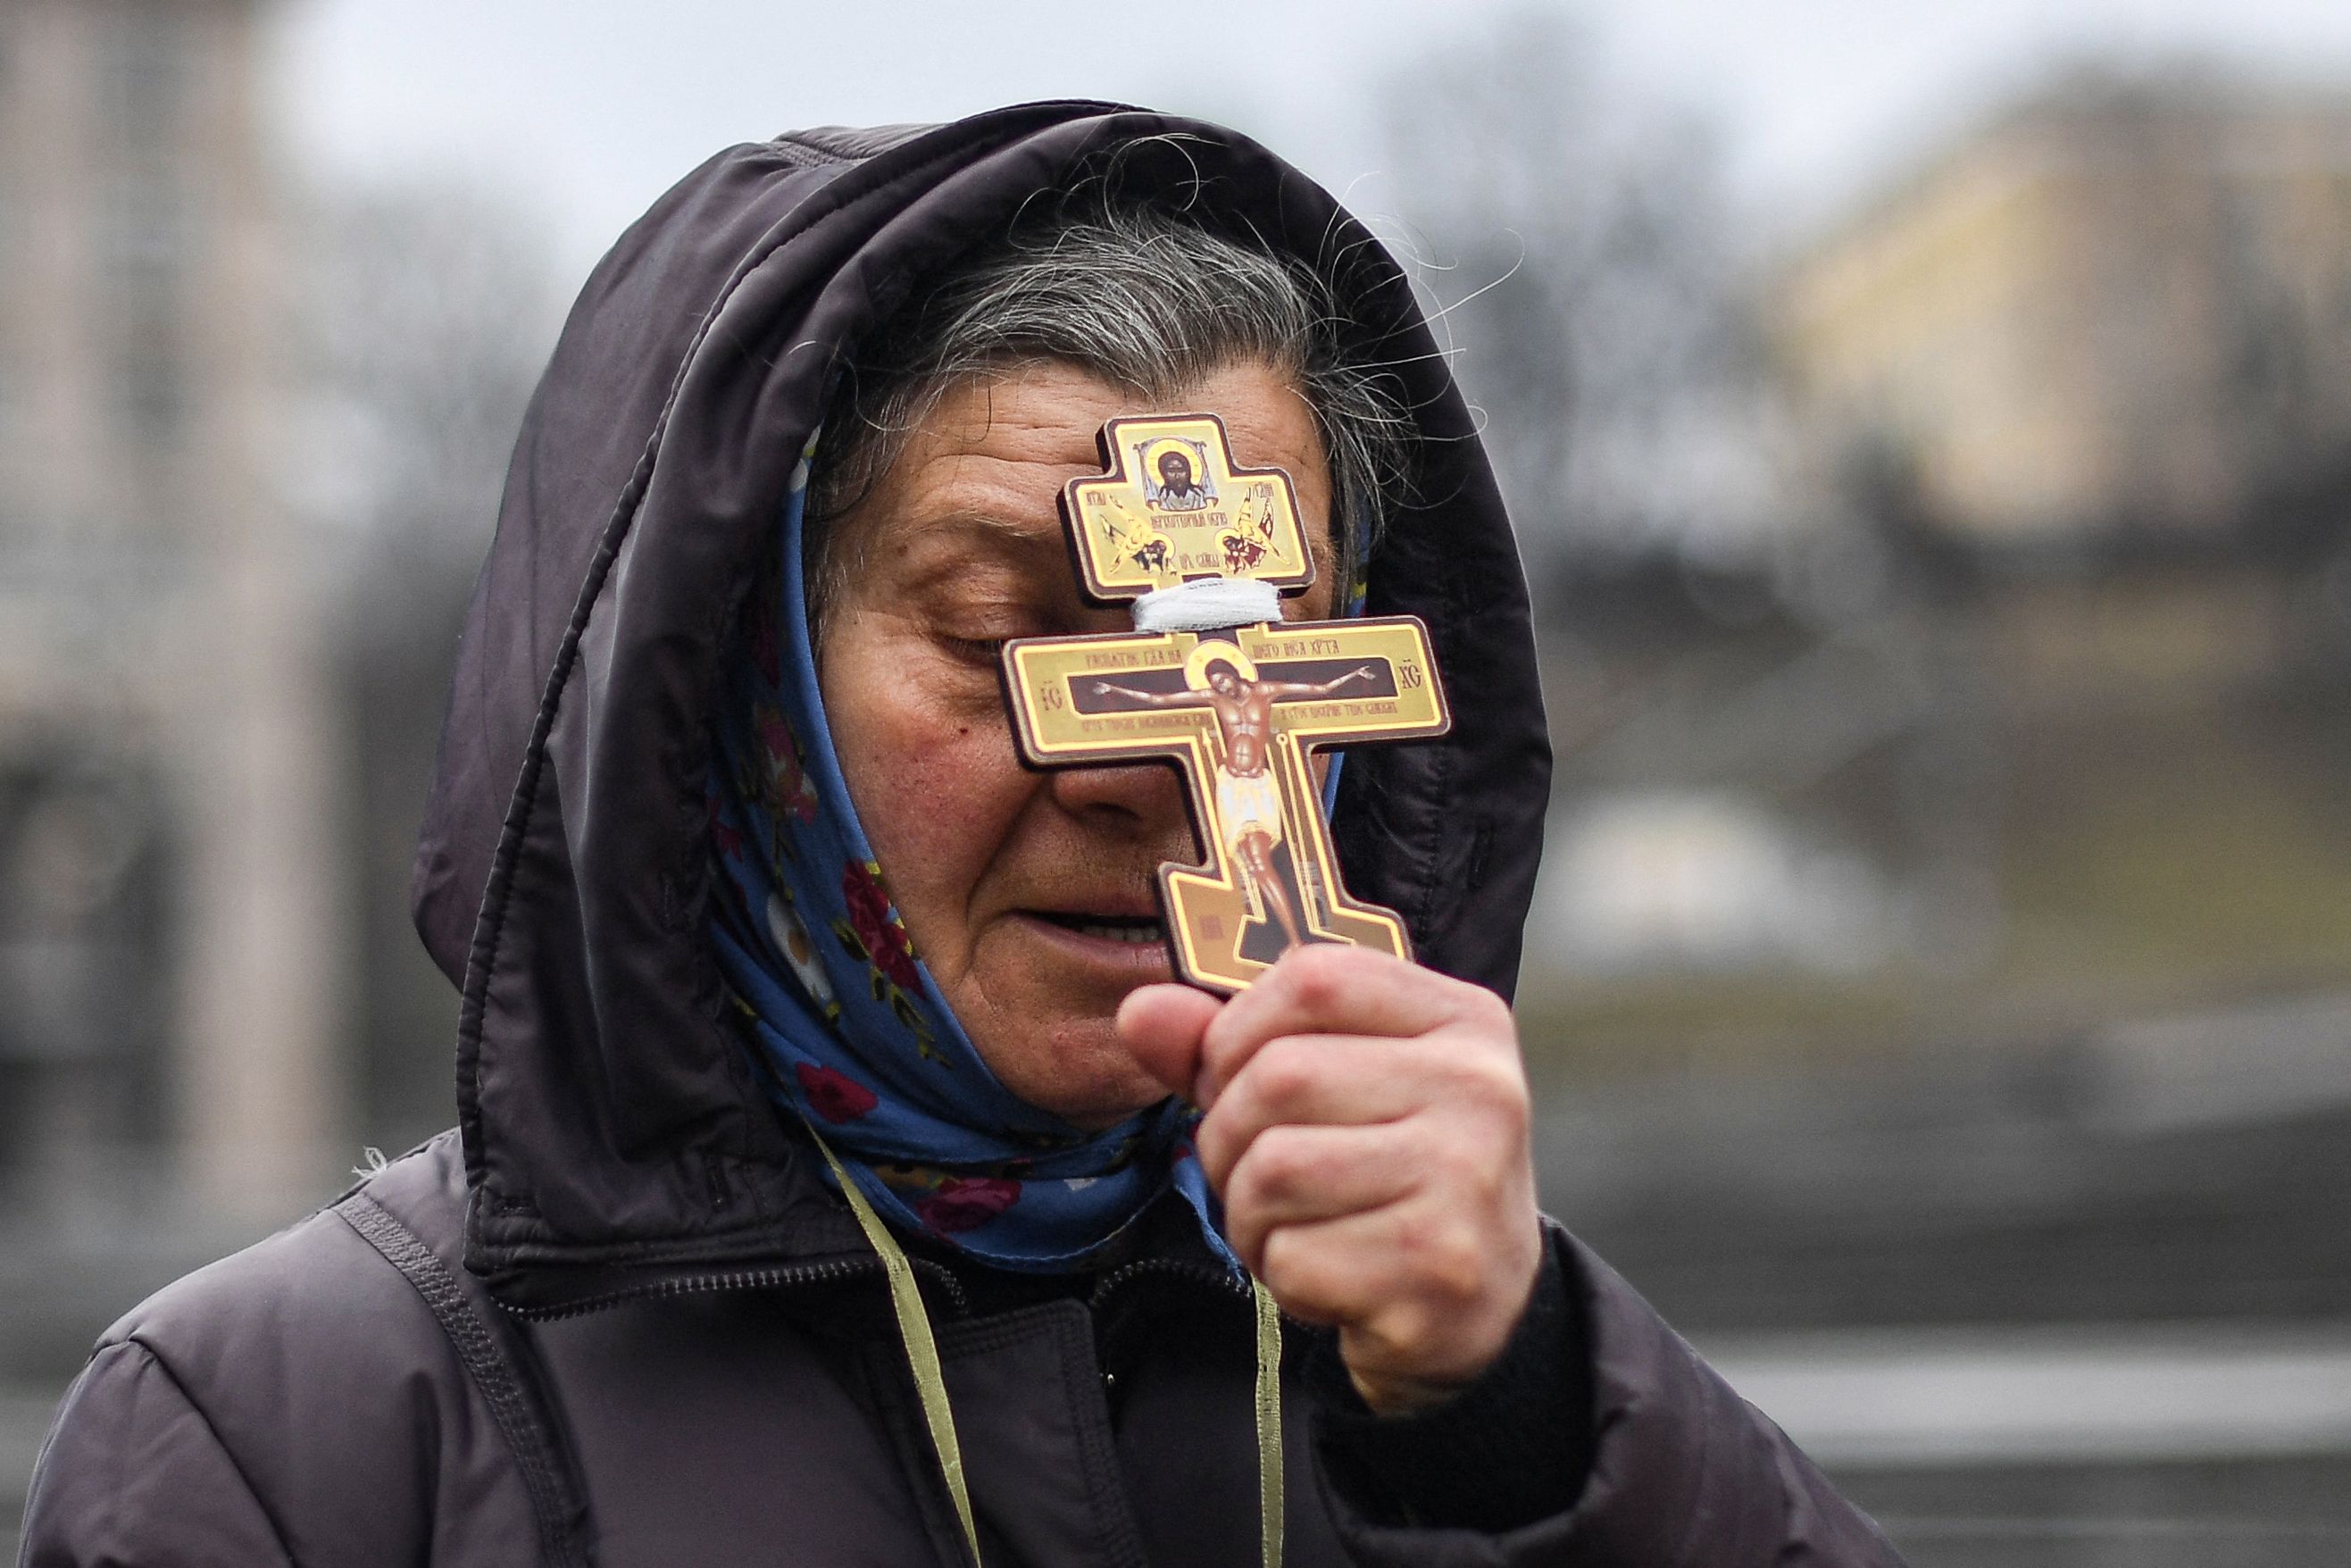 A religious woman holds a cross as she prays on Independence square in Kyiv in the morning of February 24.